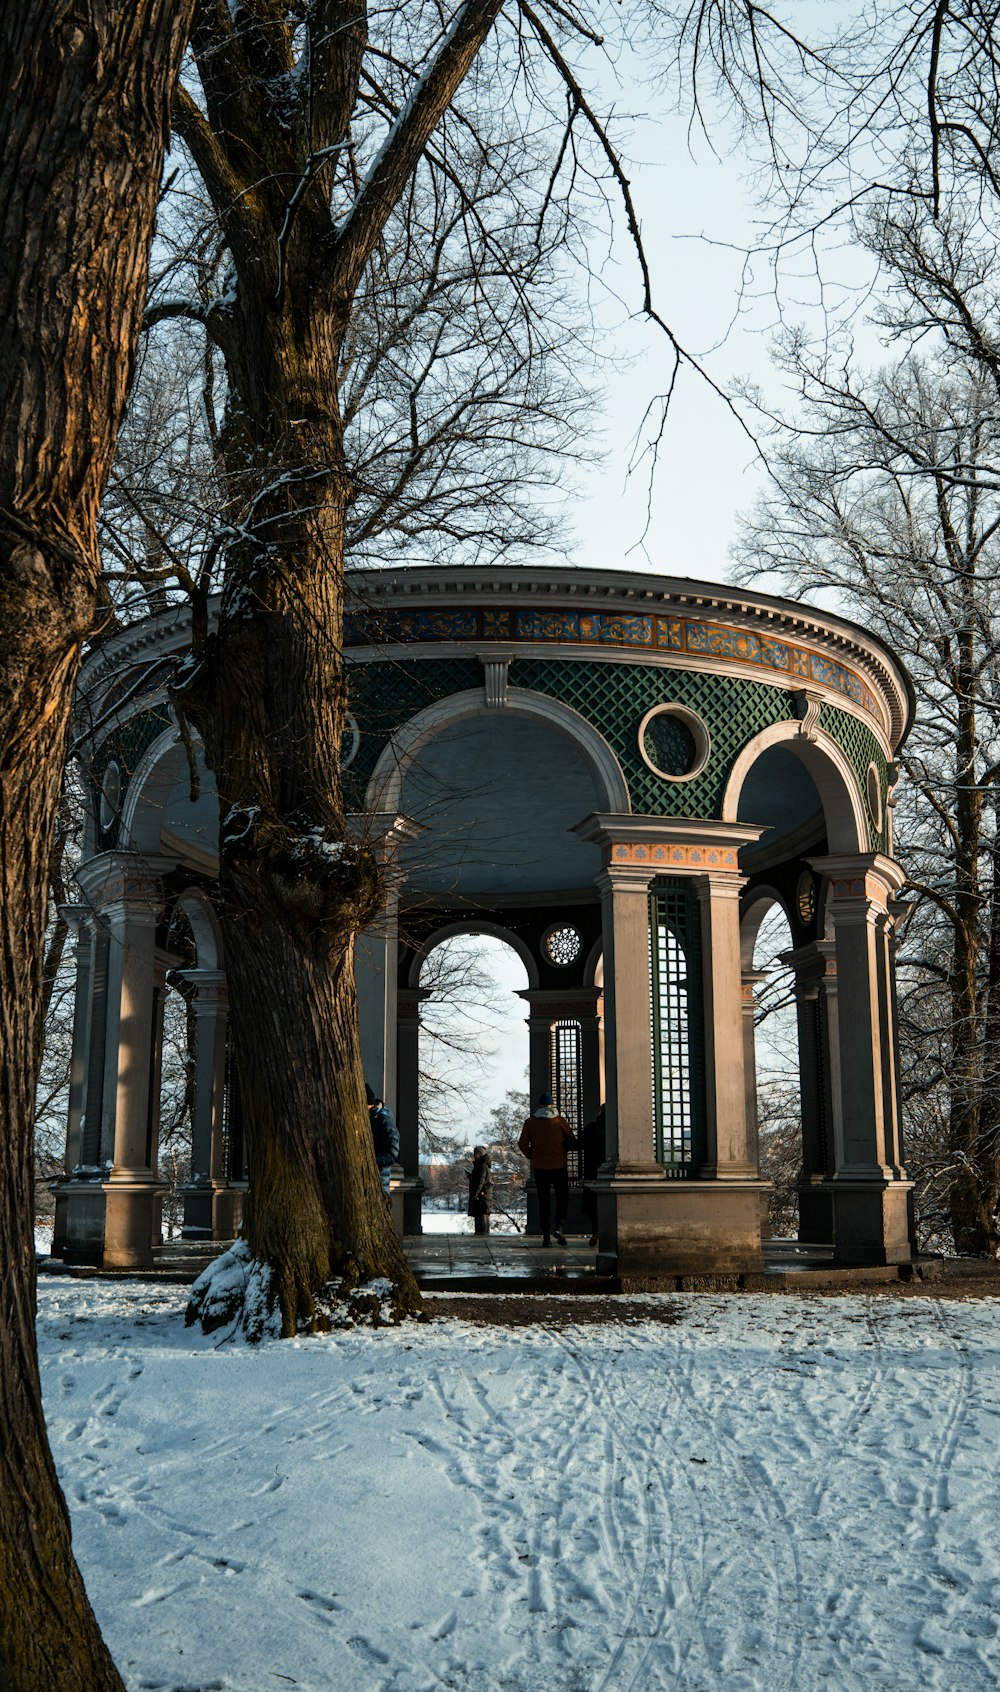 a gazebo in the middle of a snowy park